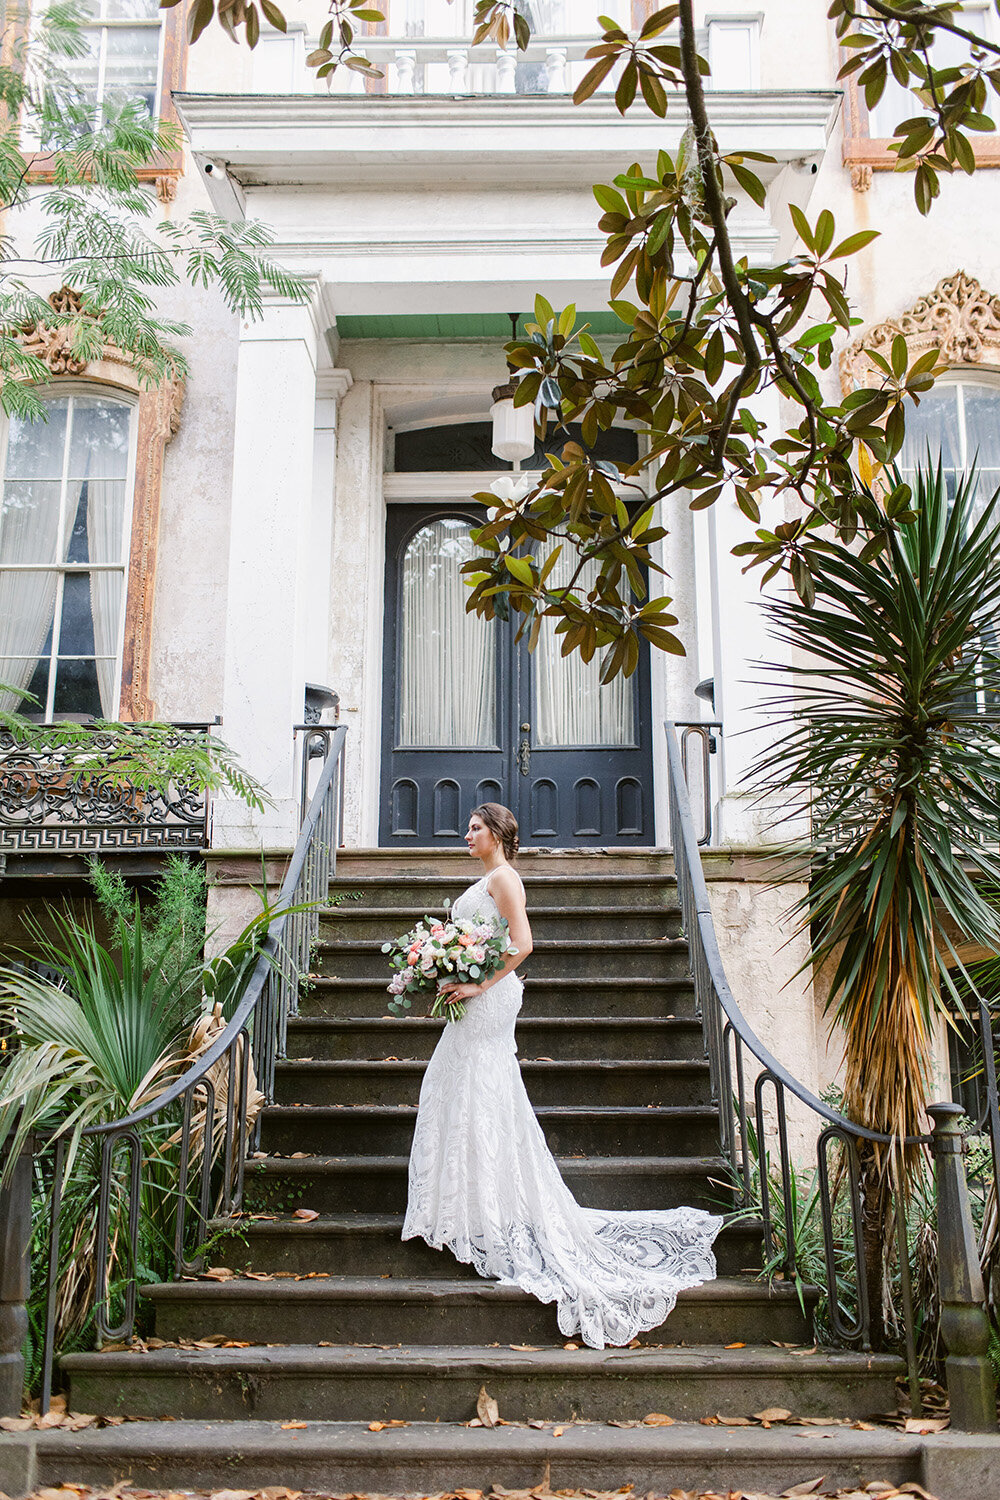 Bride standing on stairs holding bouquet.